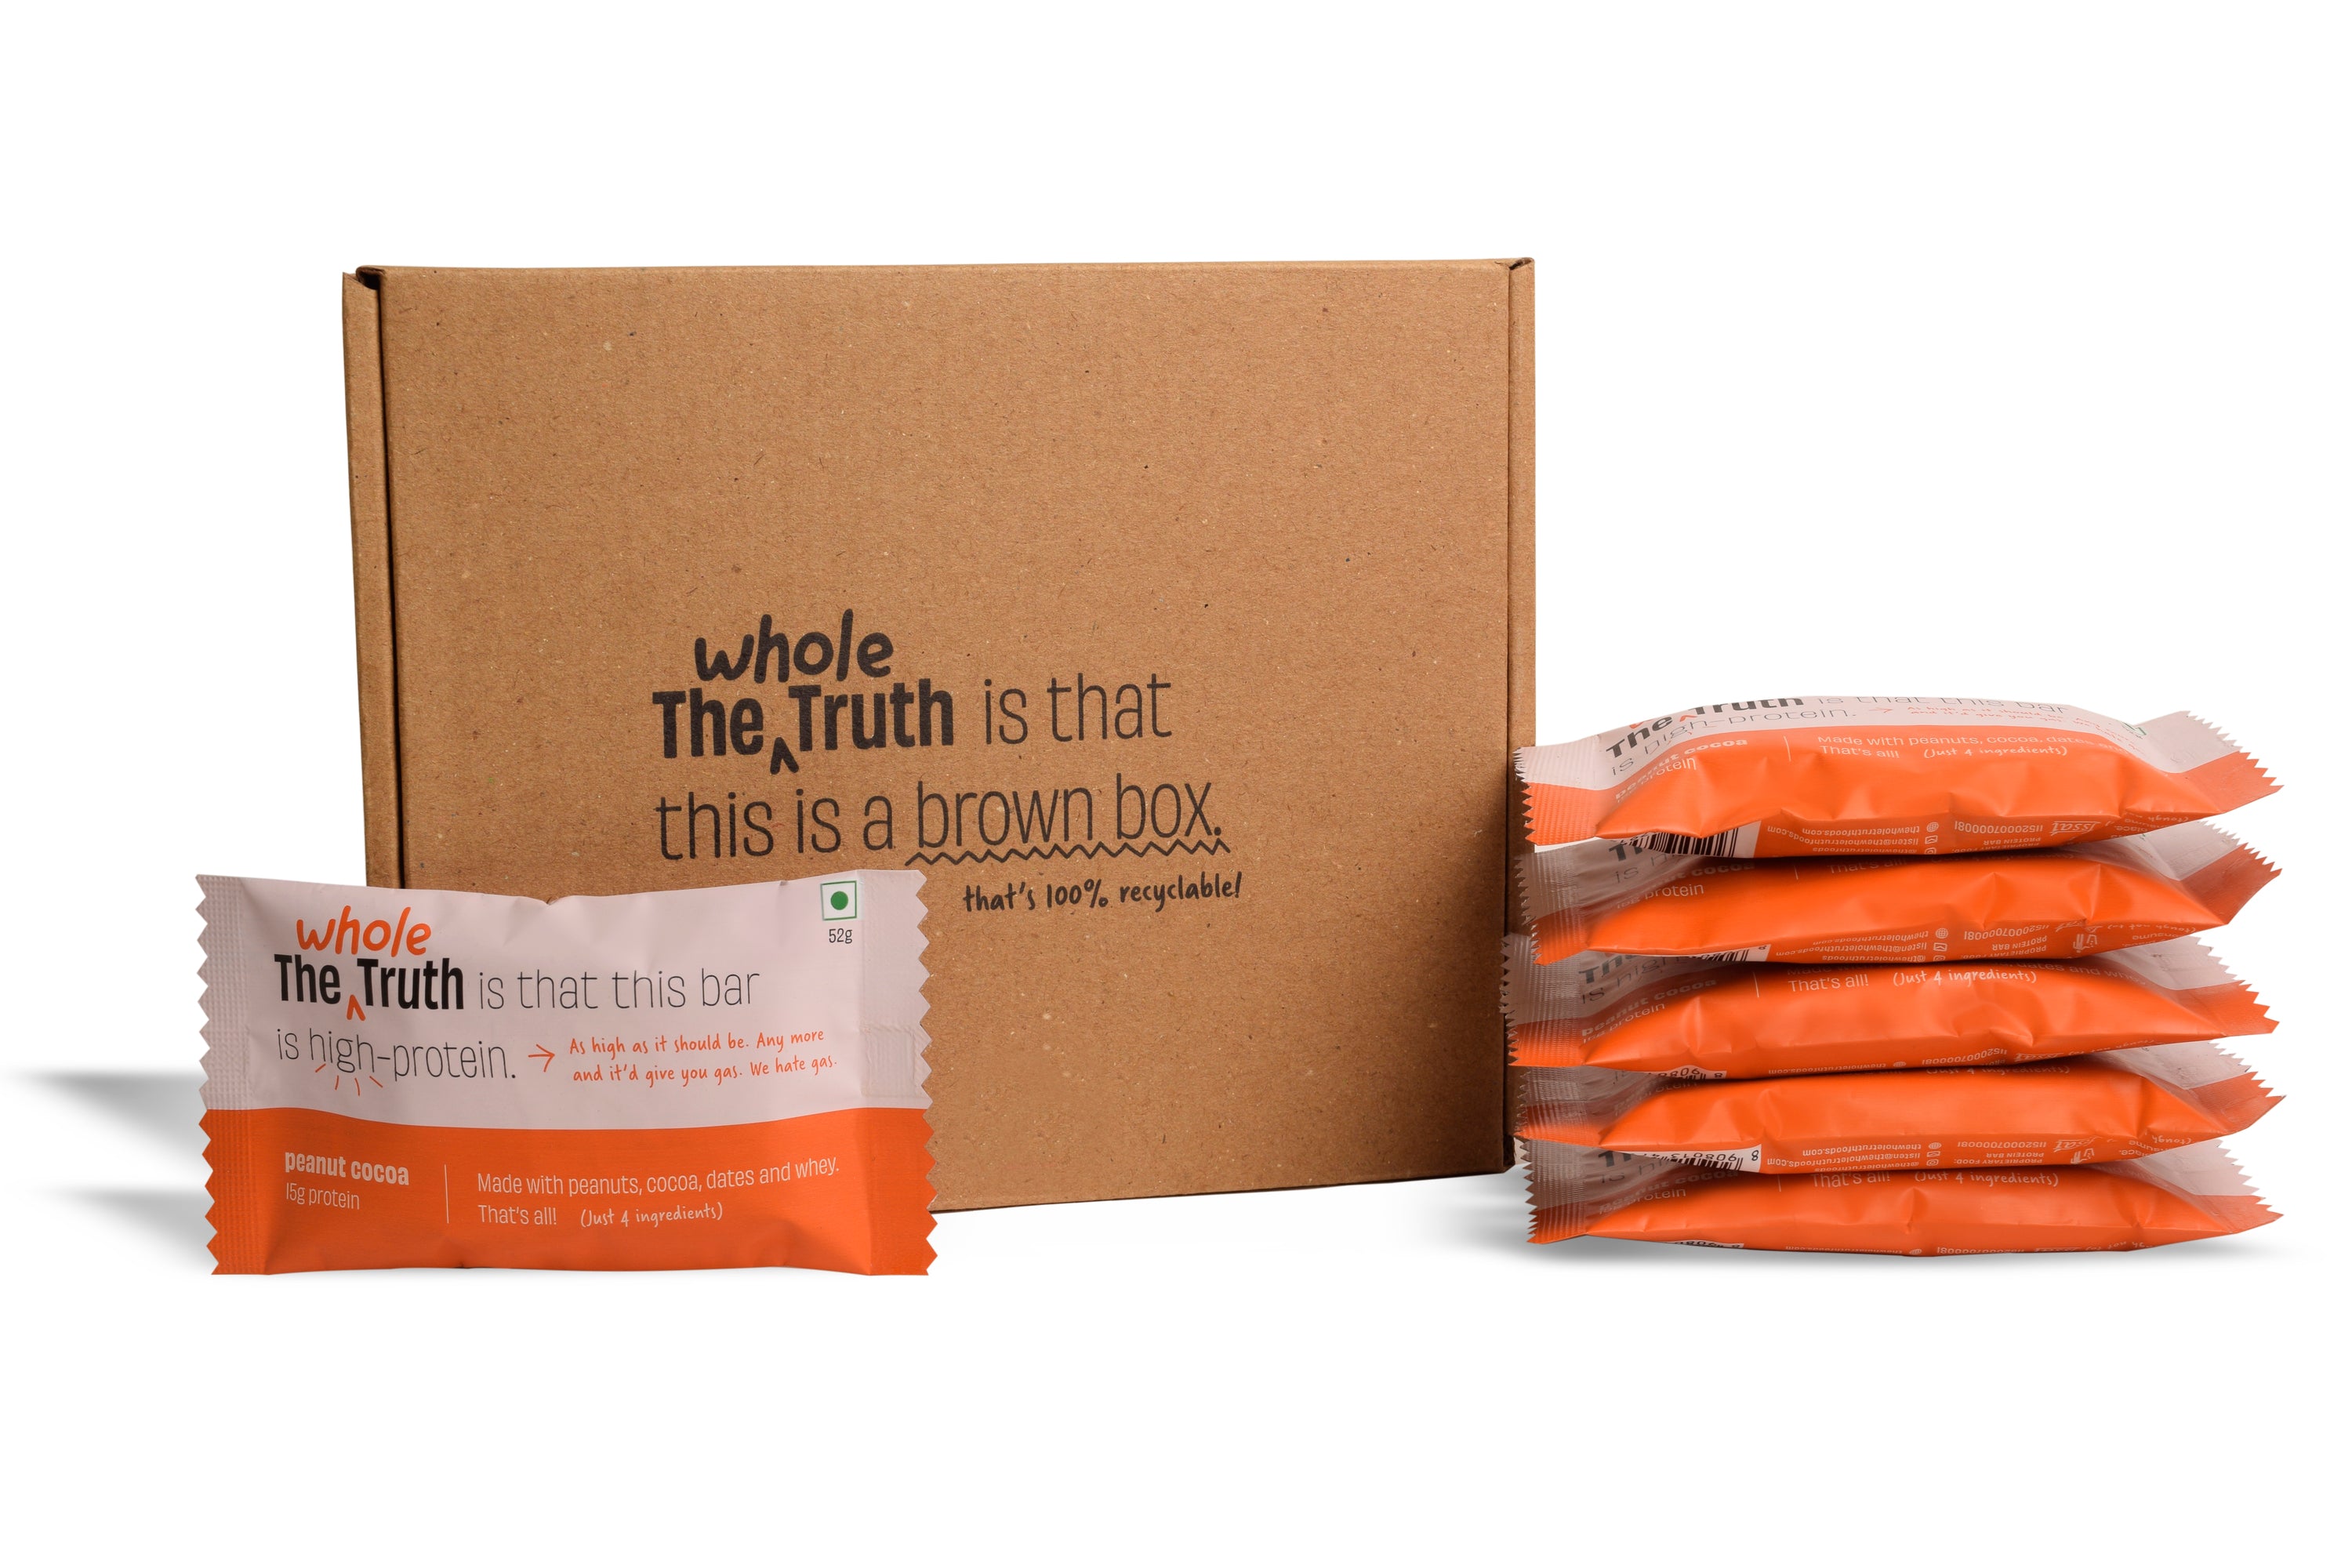 The Whole Truth - Protein Bars - Peanut Cocoa - Pack of 6 (6 x 52g) - No Added Sugar - All Natural